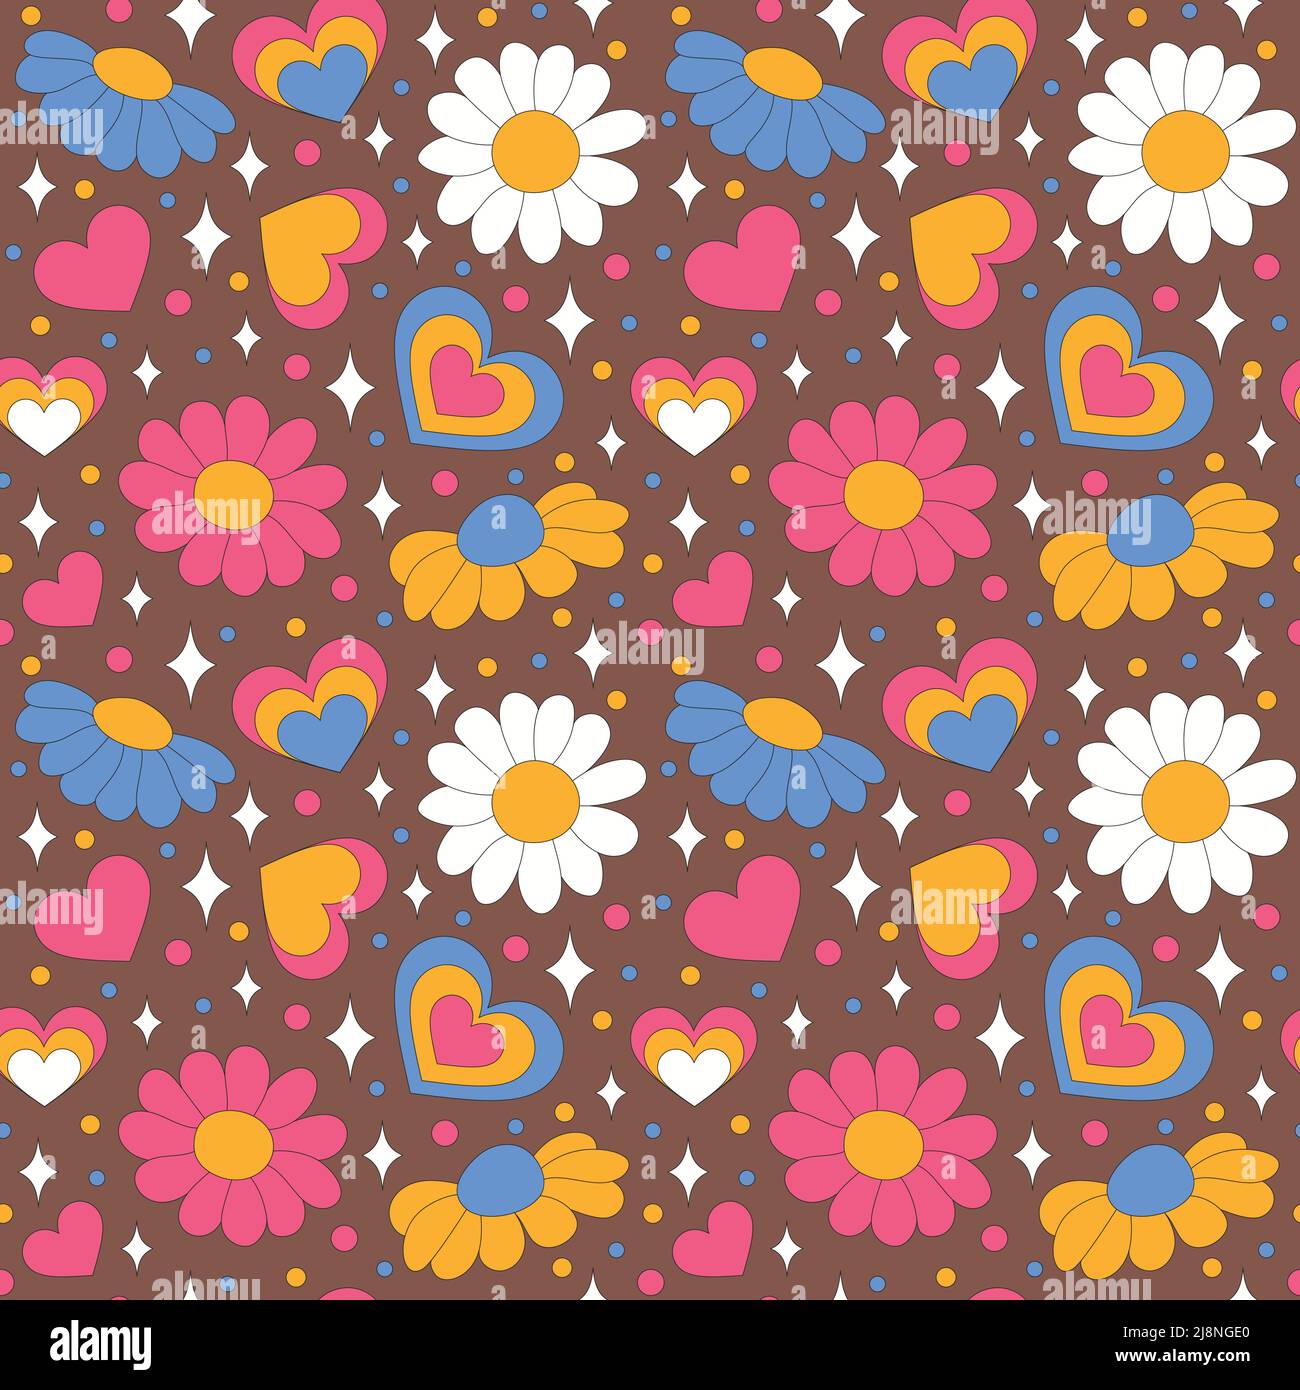 Seamless pattern with retro daisies with hearts. Stock Vector